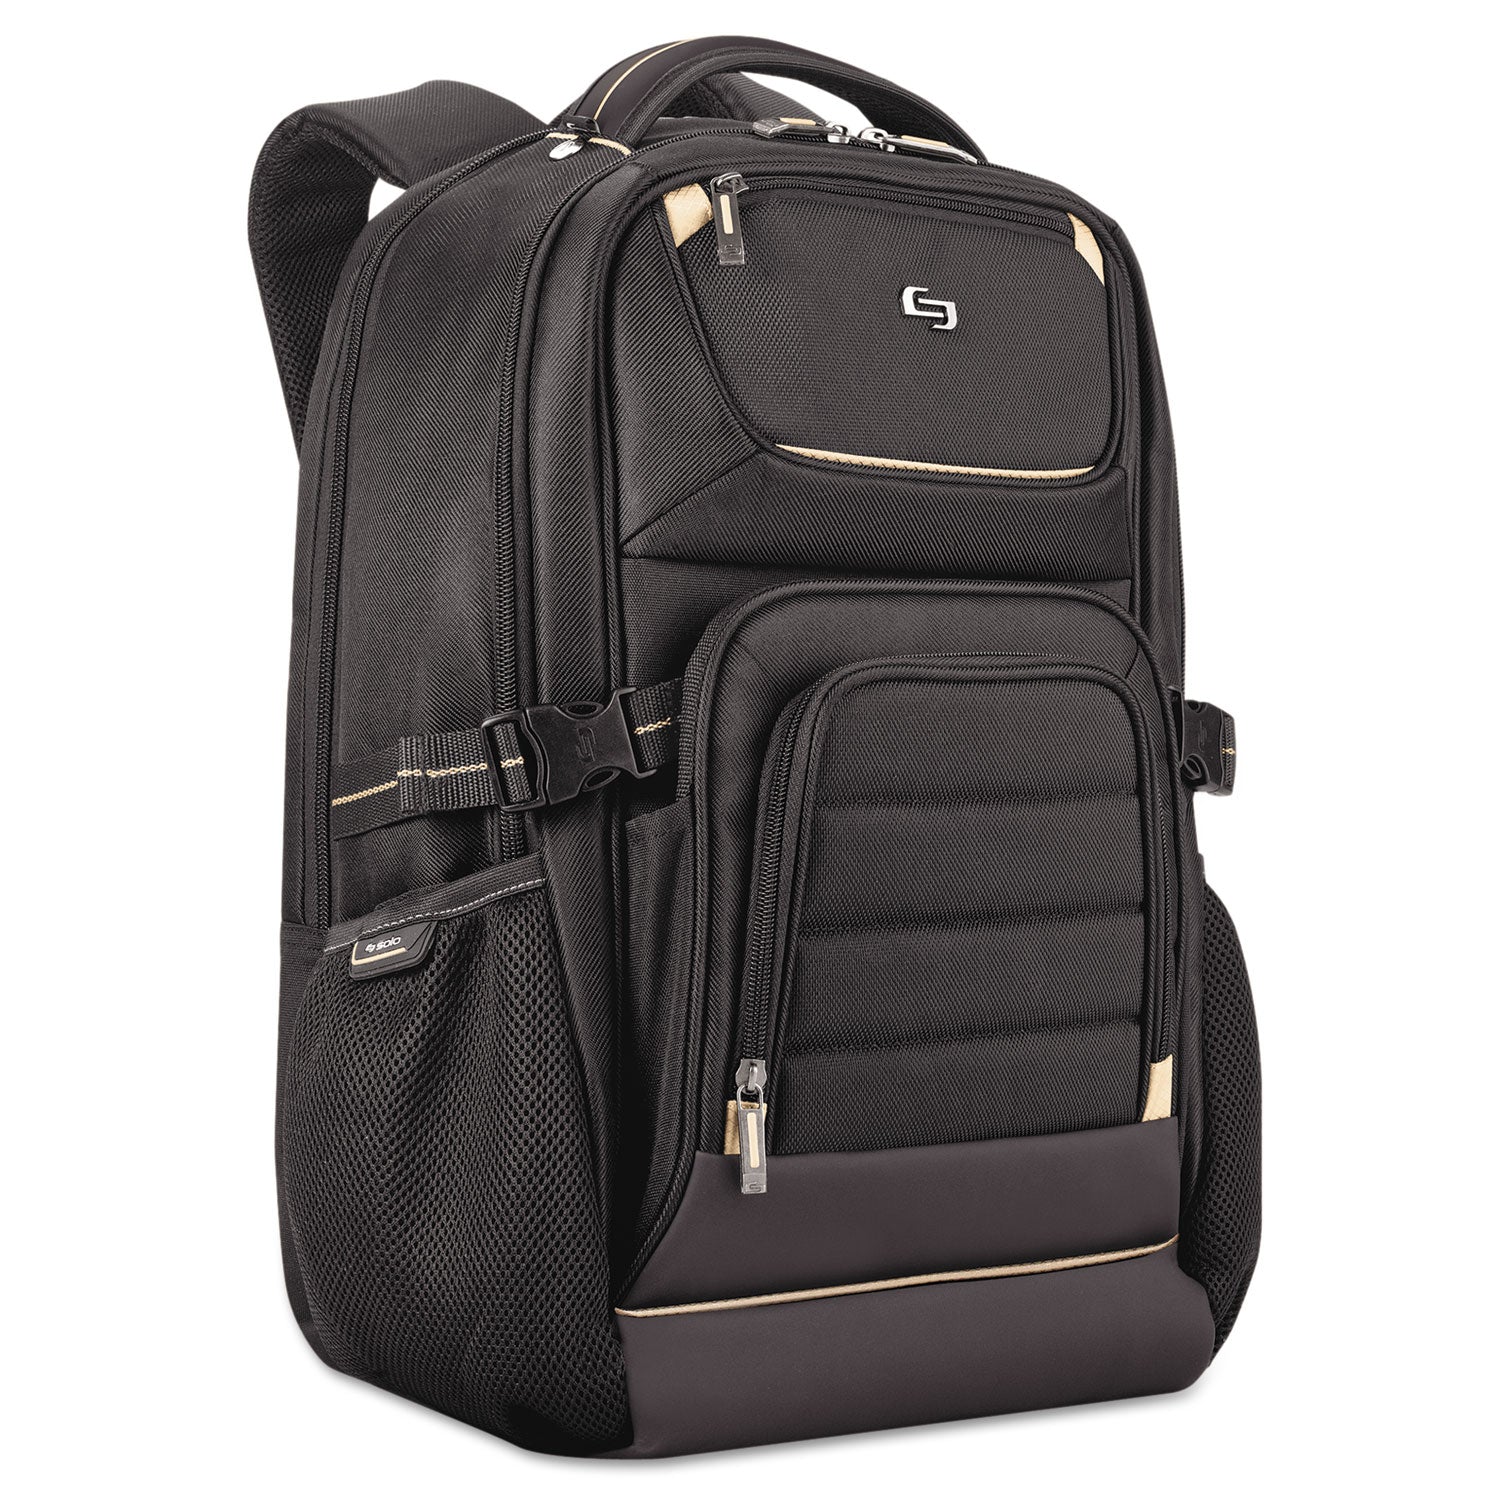 Pro Backpack, Fits Devices Up to 17.3", Polyester, 12.25 x 6.75 x 17.5, Black - 